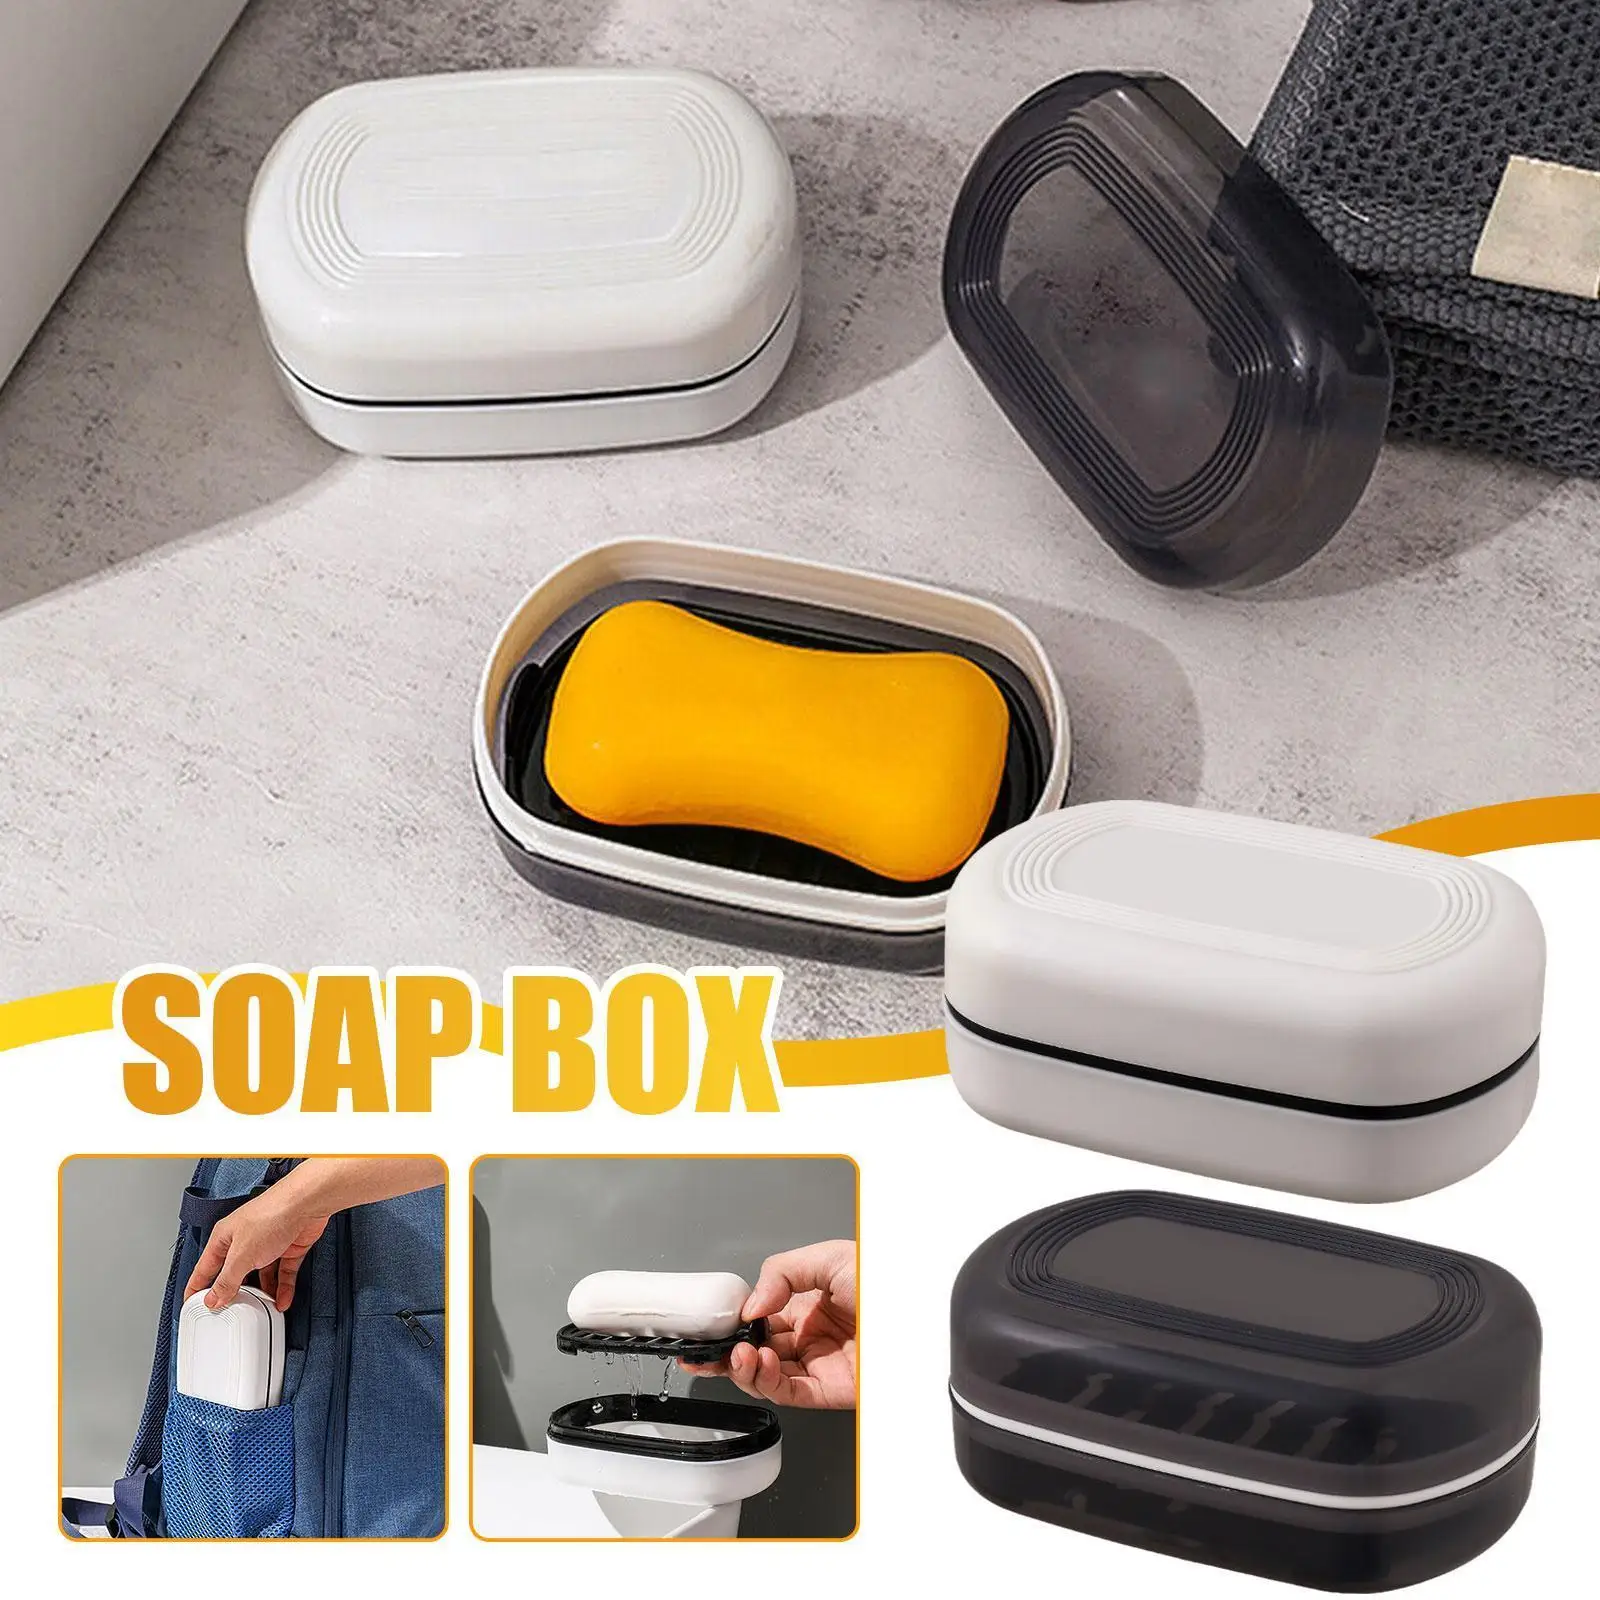 

Portable Soap Box Bathroom Soap Dishes Easy To Shower Soap Outdoor Home Camping Travel Holder Carry Hiking Container A6x7